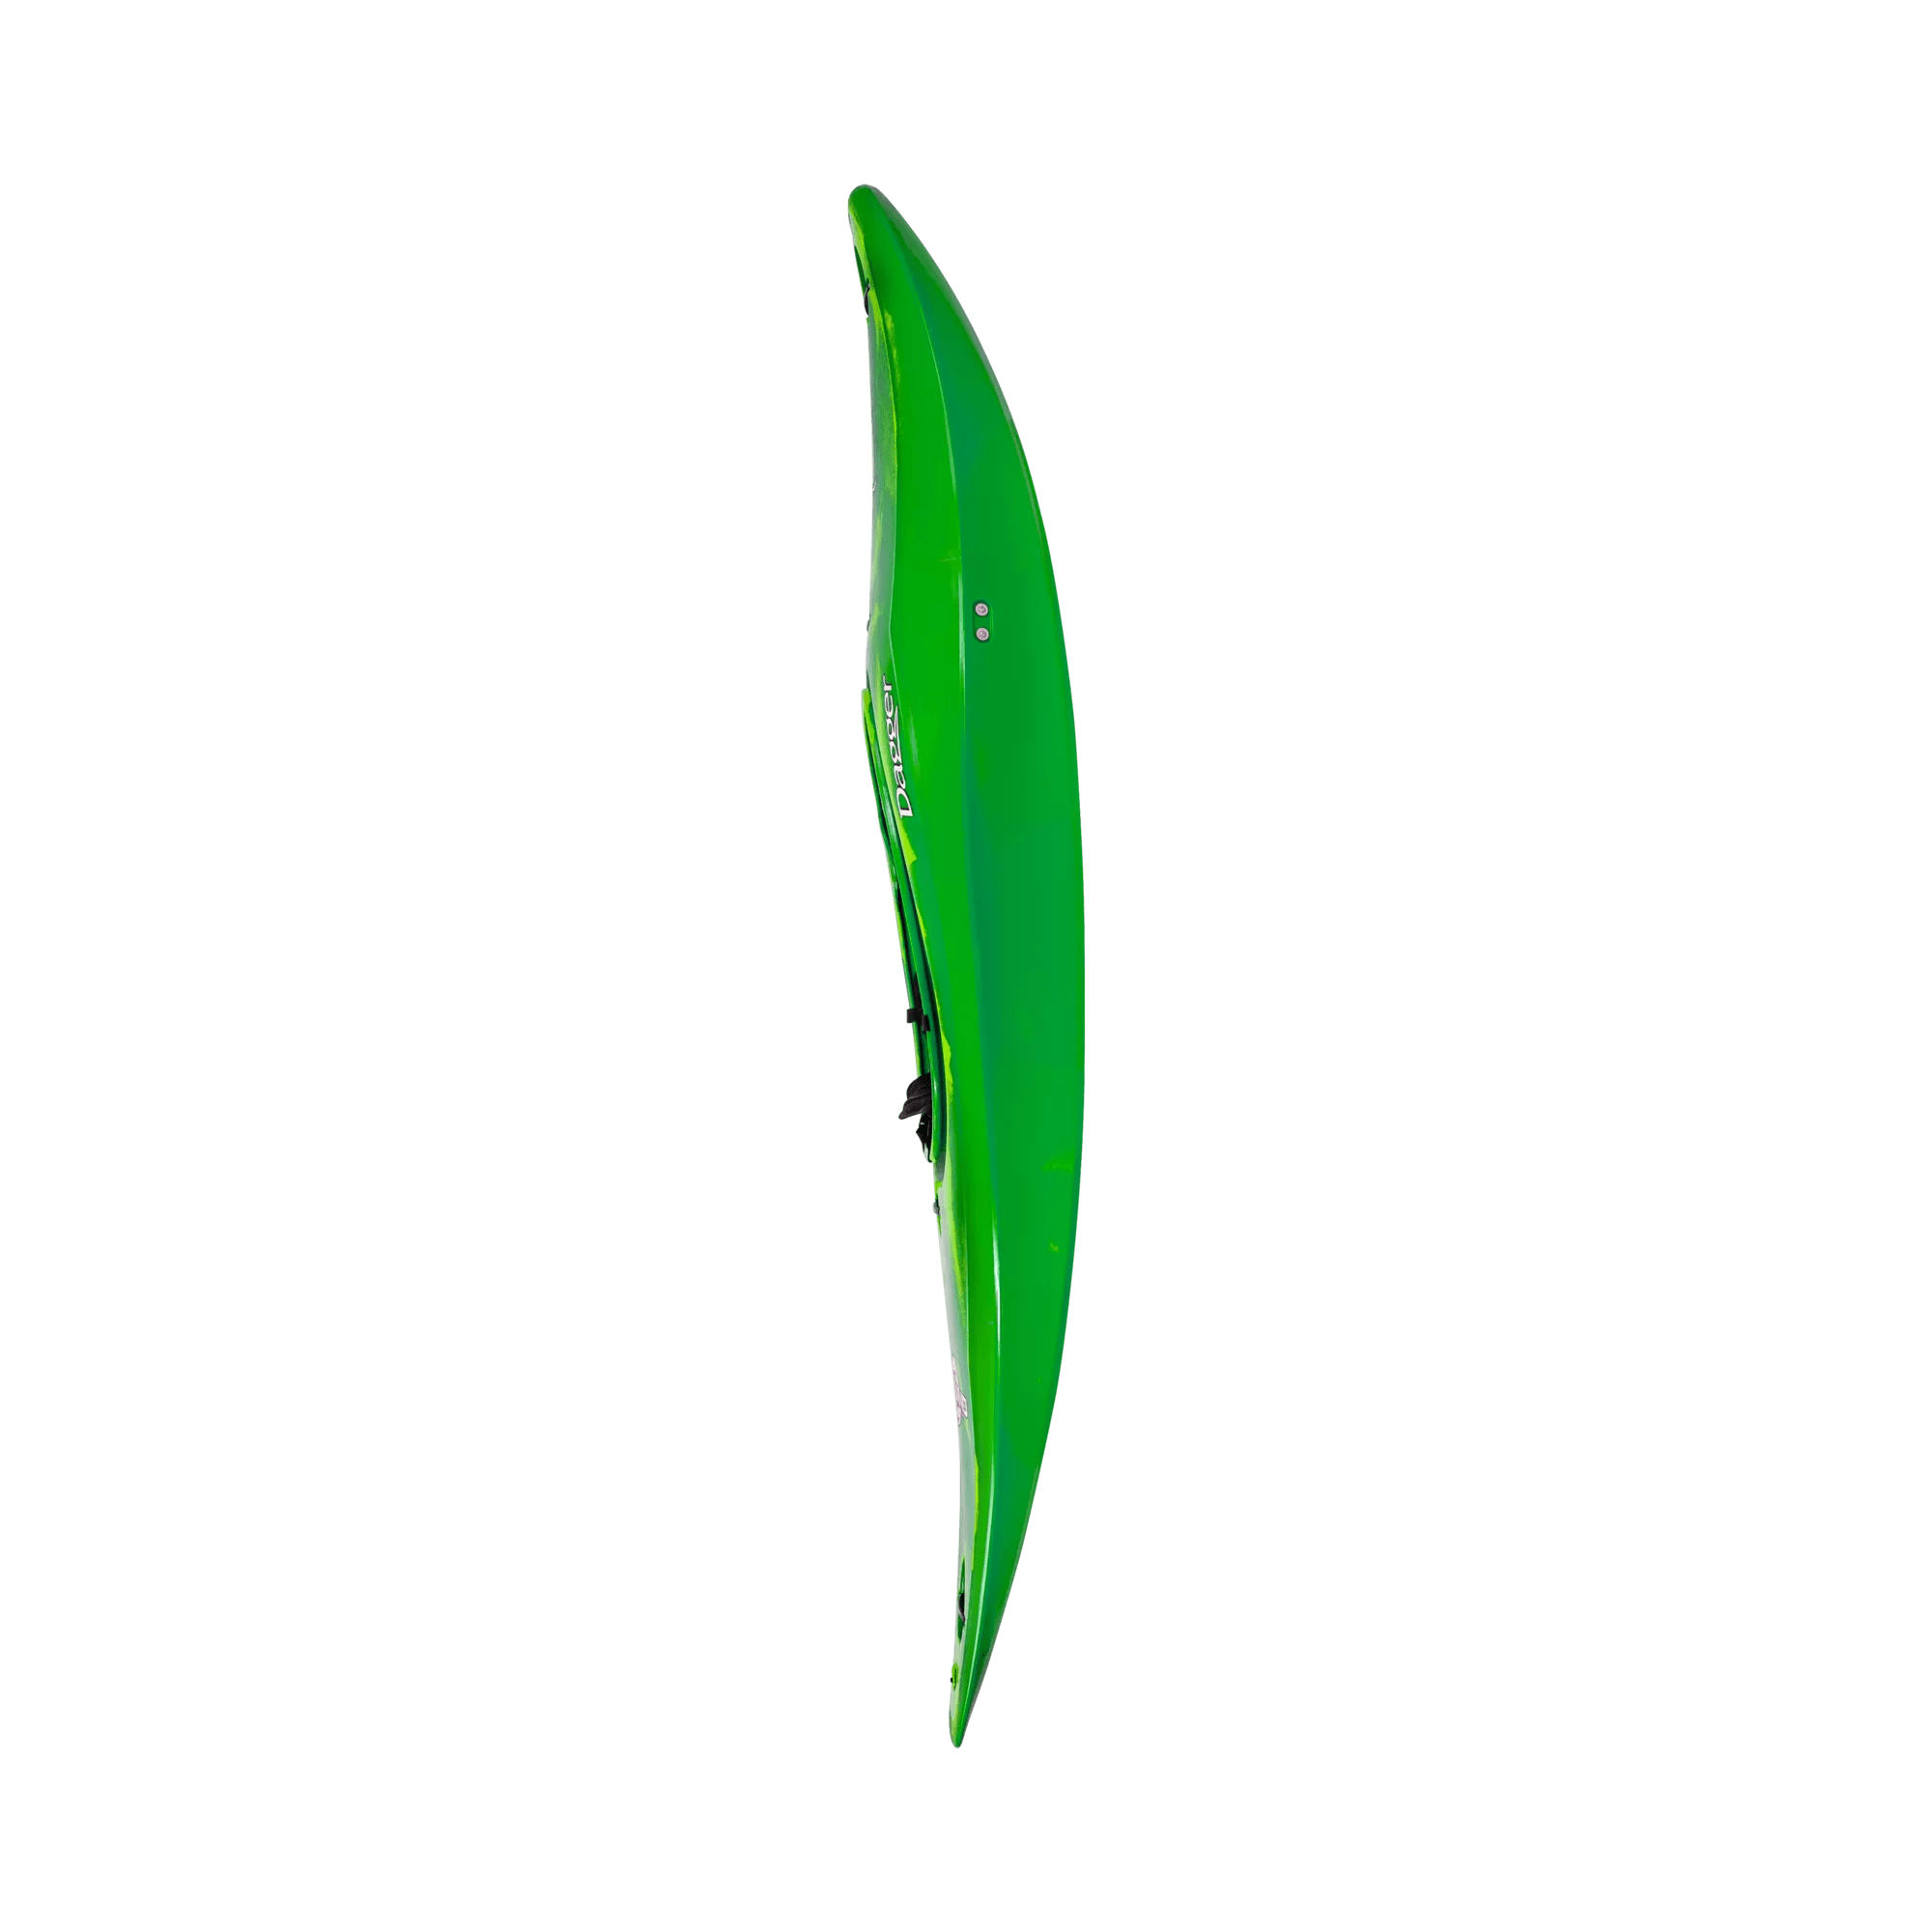 DAGGER - Rewind L River Play Whitewater Kayak - Green - 9010484207 - SIDE